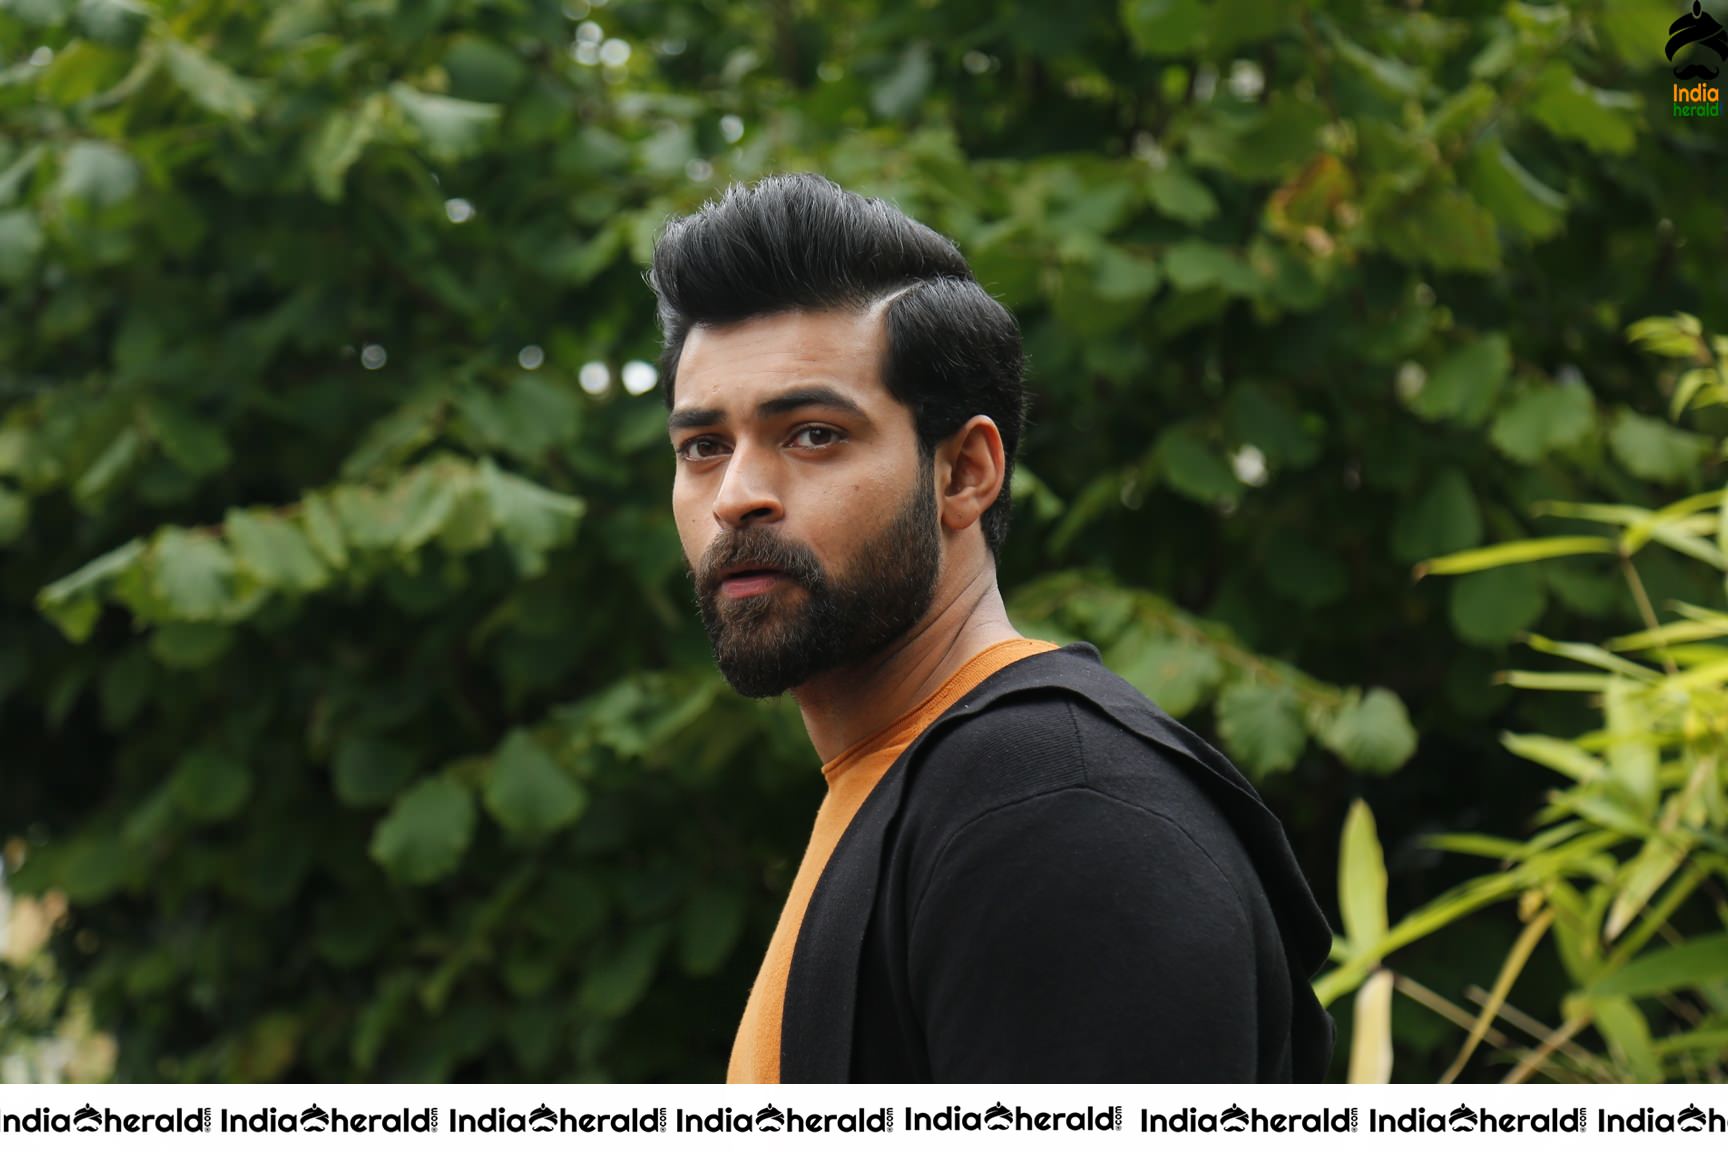 Actor Varun Tej Recent Stylish Photoshoot to receive Official Merchandise of DC Heroes Set 2